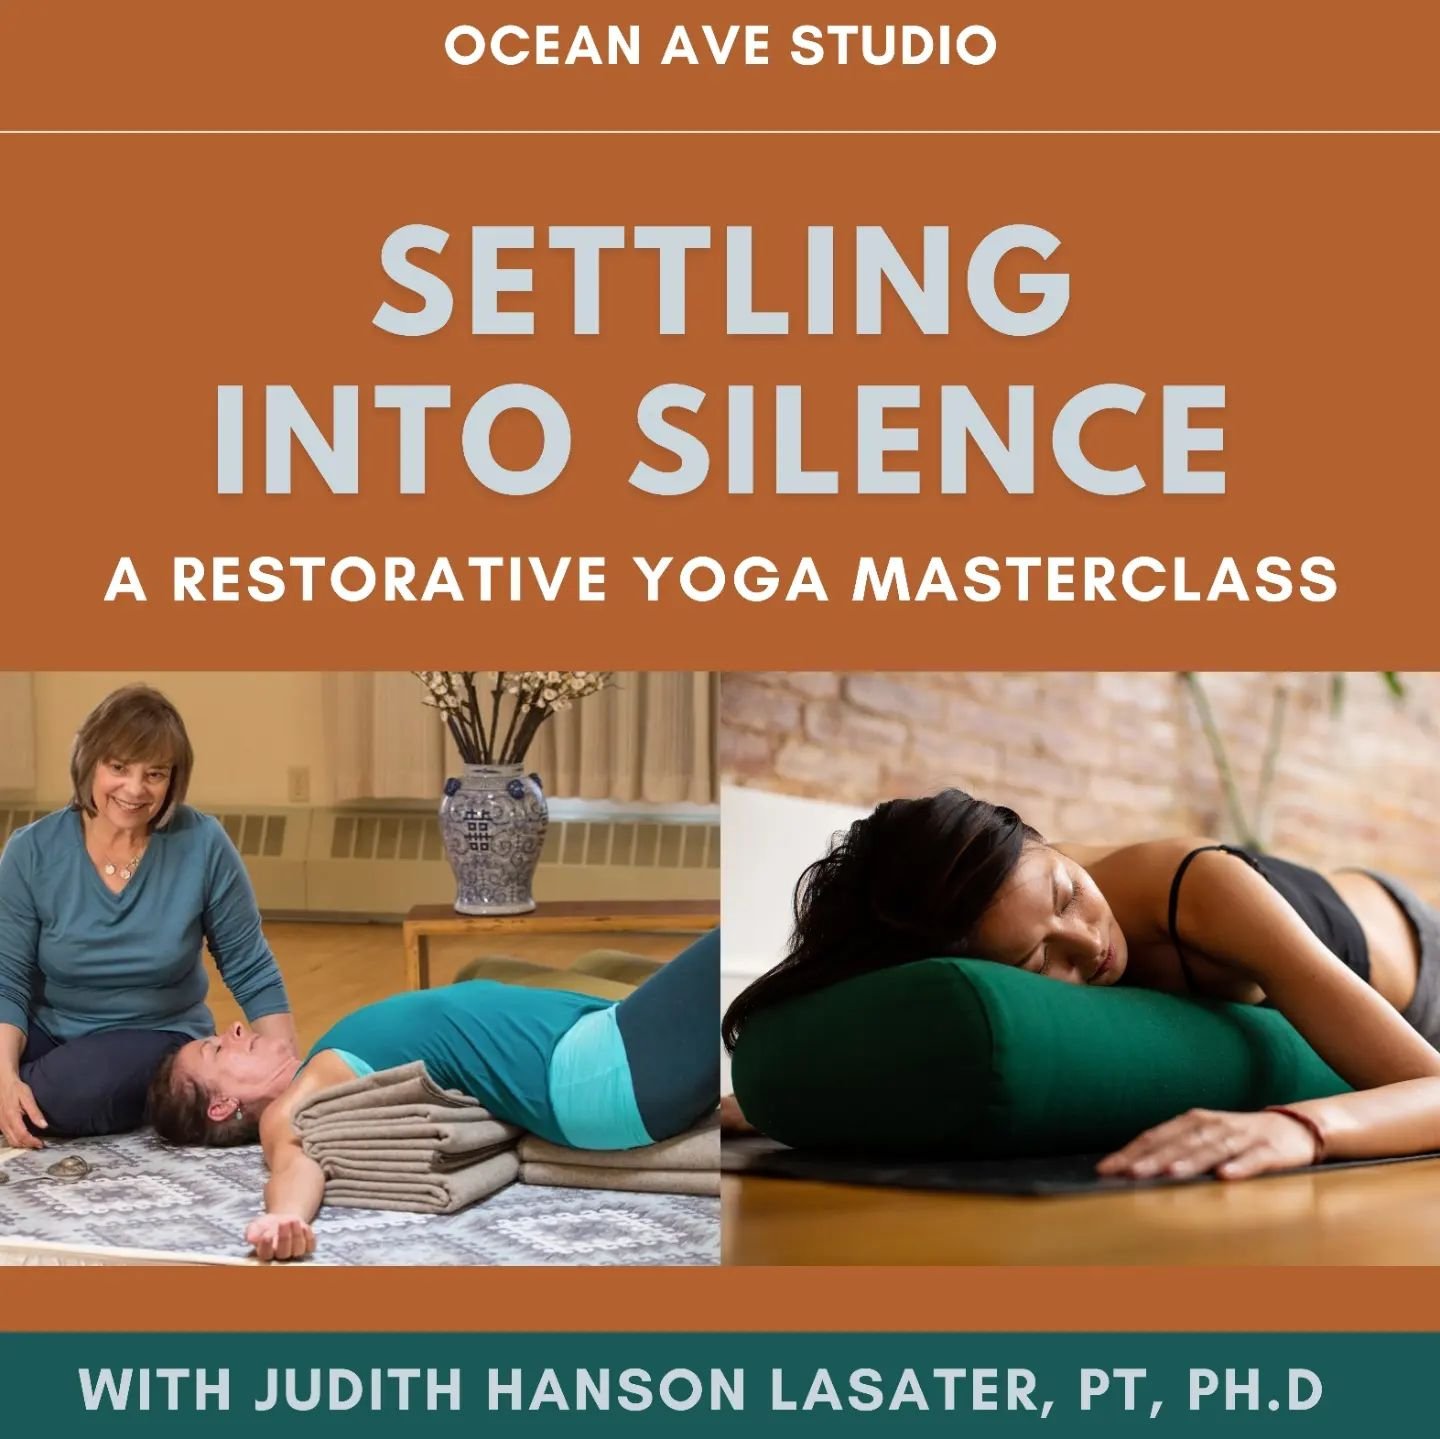 Take a break from your constant busy-ness and stress in a class exclusively focused on a Restorative asana practice. Not only does Restorative yoga feel good, but it also has been scientifically proven to have tremendous beneficial effects on our hea